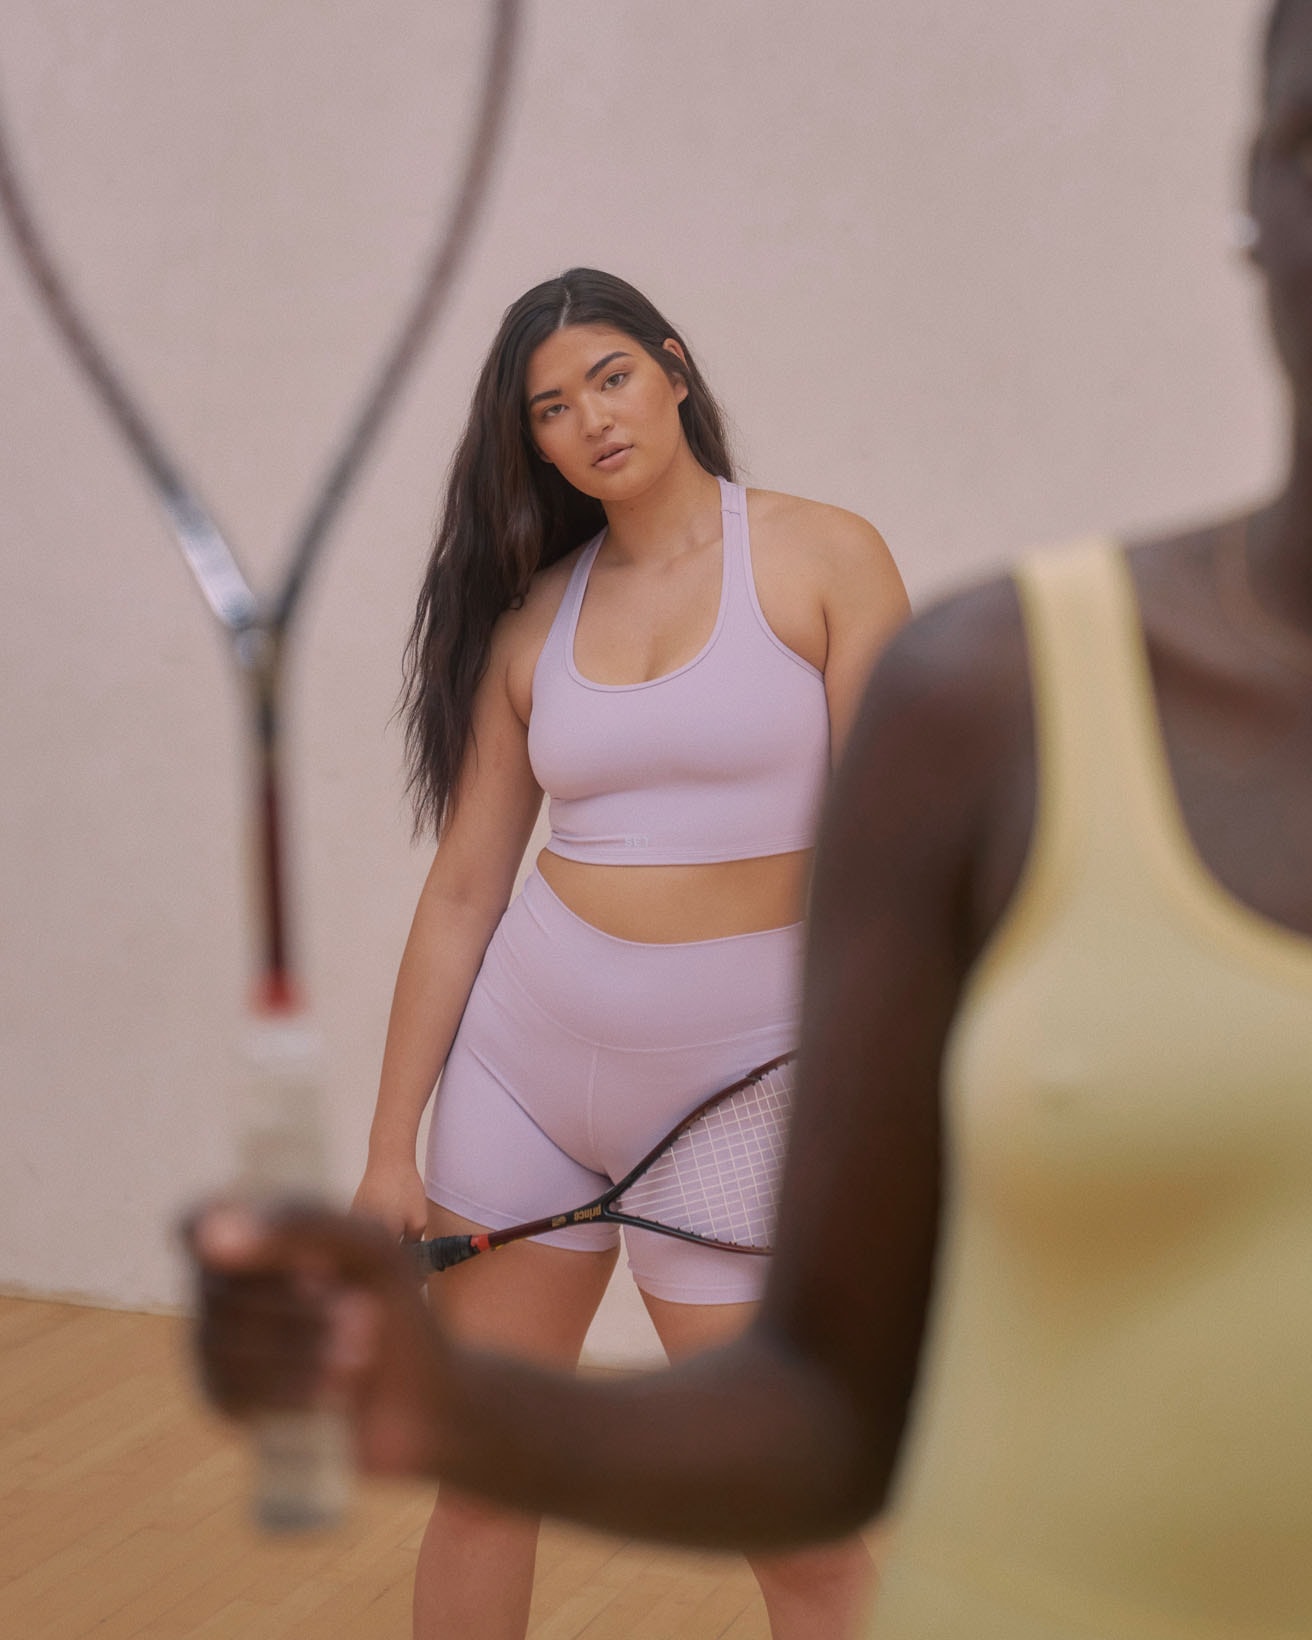 SET ACTIVE Launches SPORTBODY Athleisure Collection